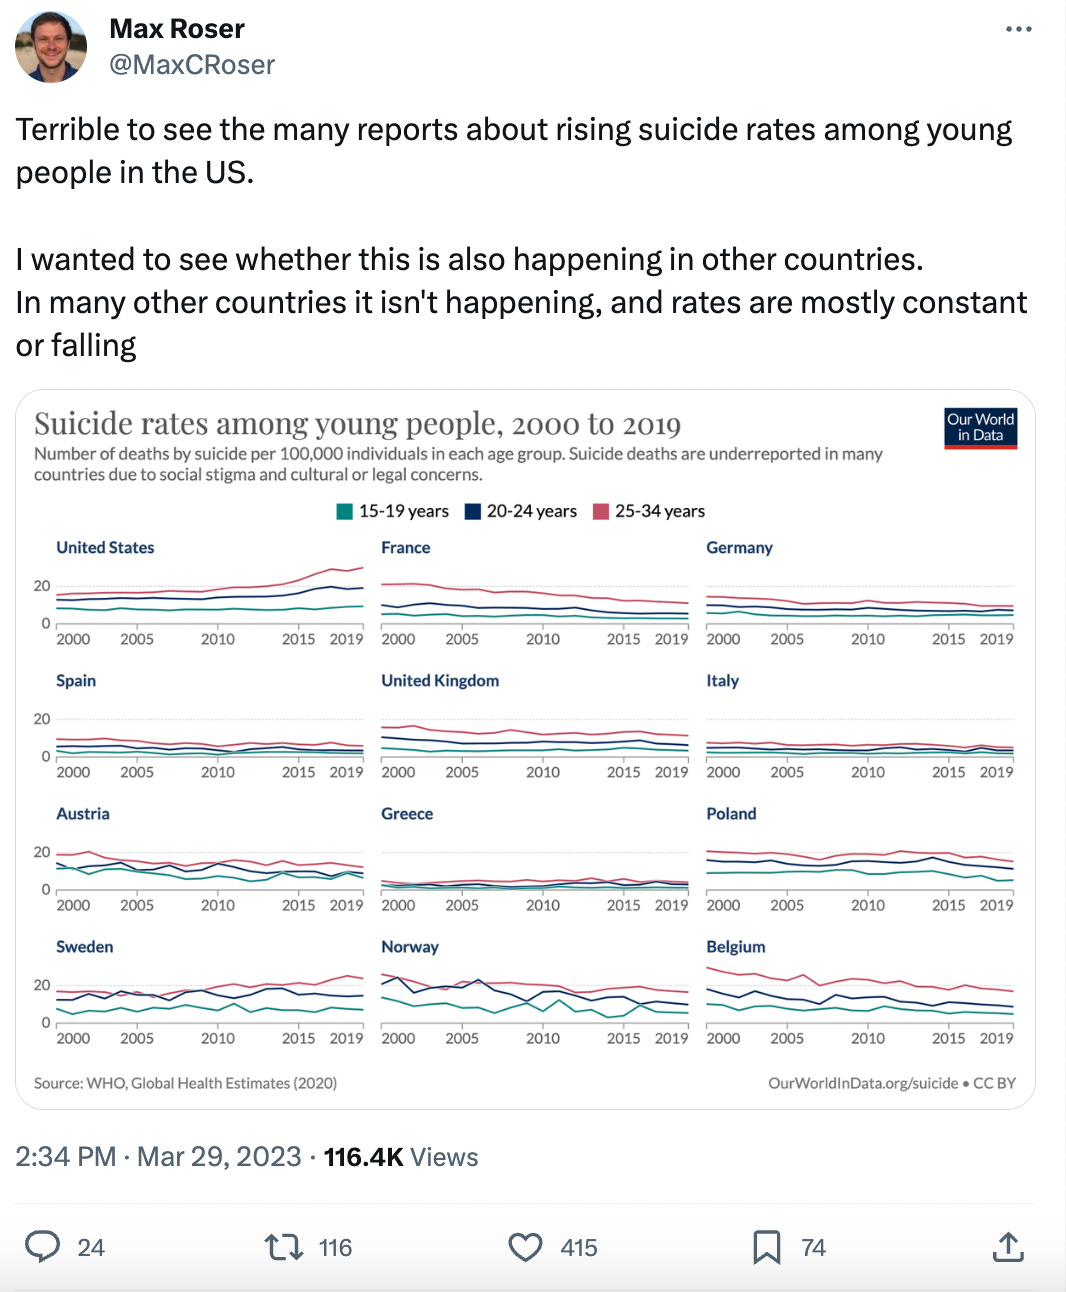 Max Roser Tweet Showing Trends in Suicide Not Getting Worse Since 2010 in many countries